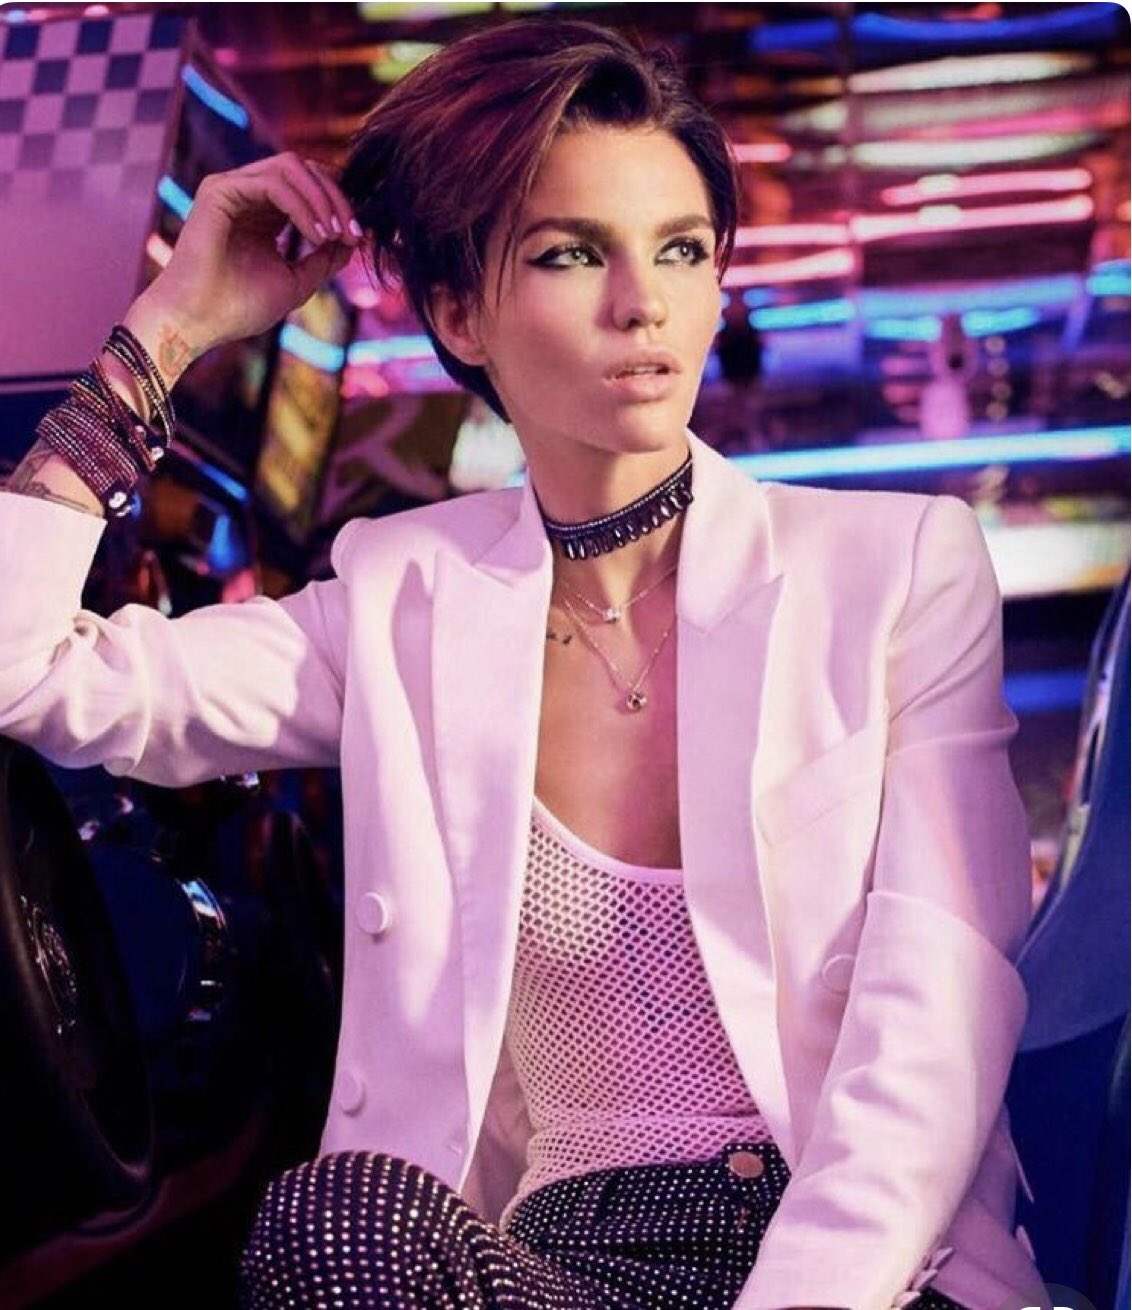 HAPPY HAPPY BIRTHDAY RUBY ROSE! May your day be beautiful like you! Much love from Texas!    